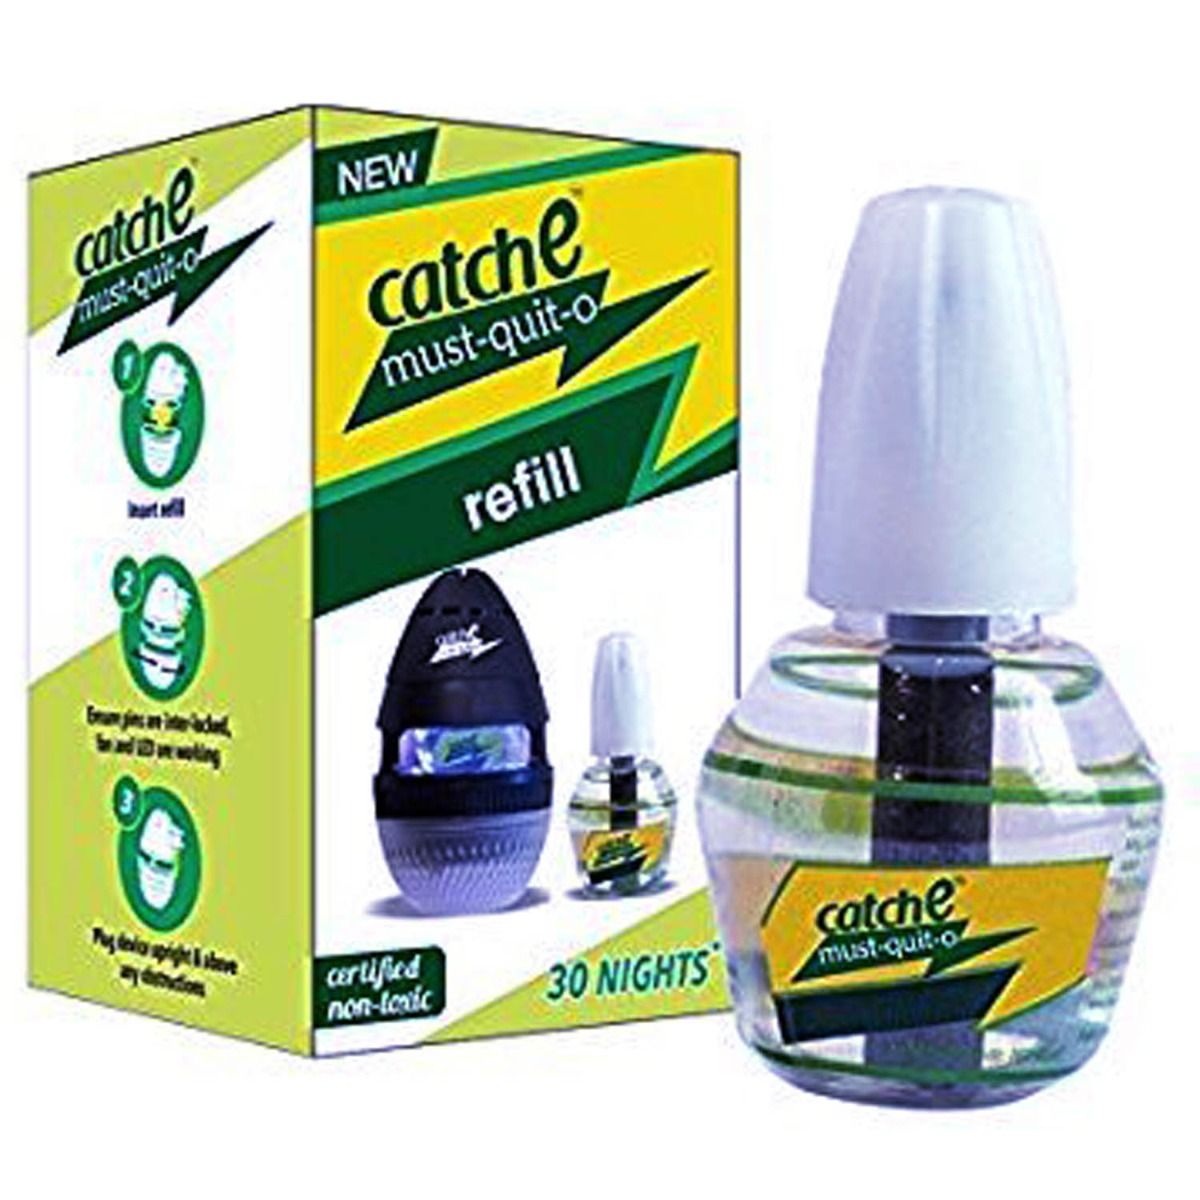 Buy Catche Must-Quit-O 30 Nights Refill, 35 ml Online